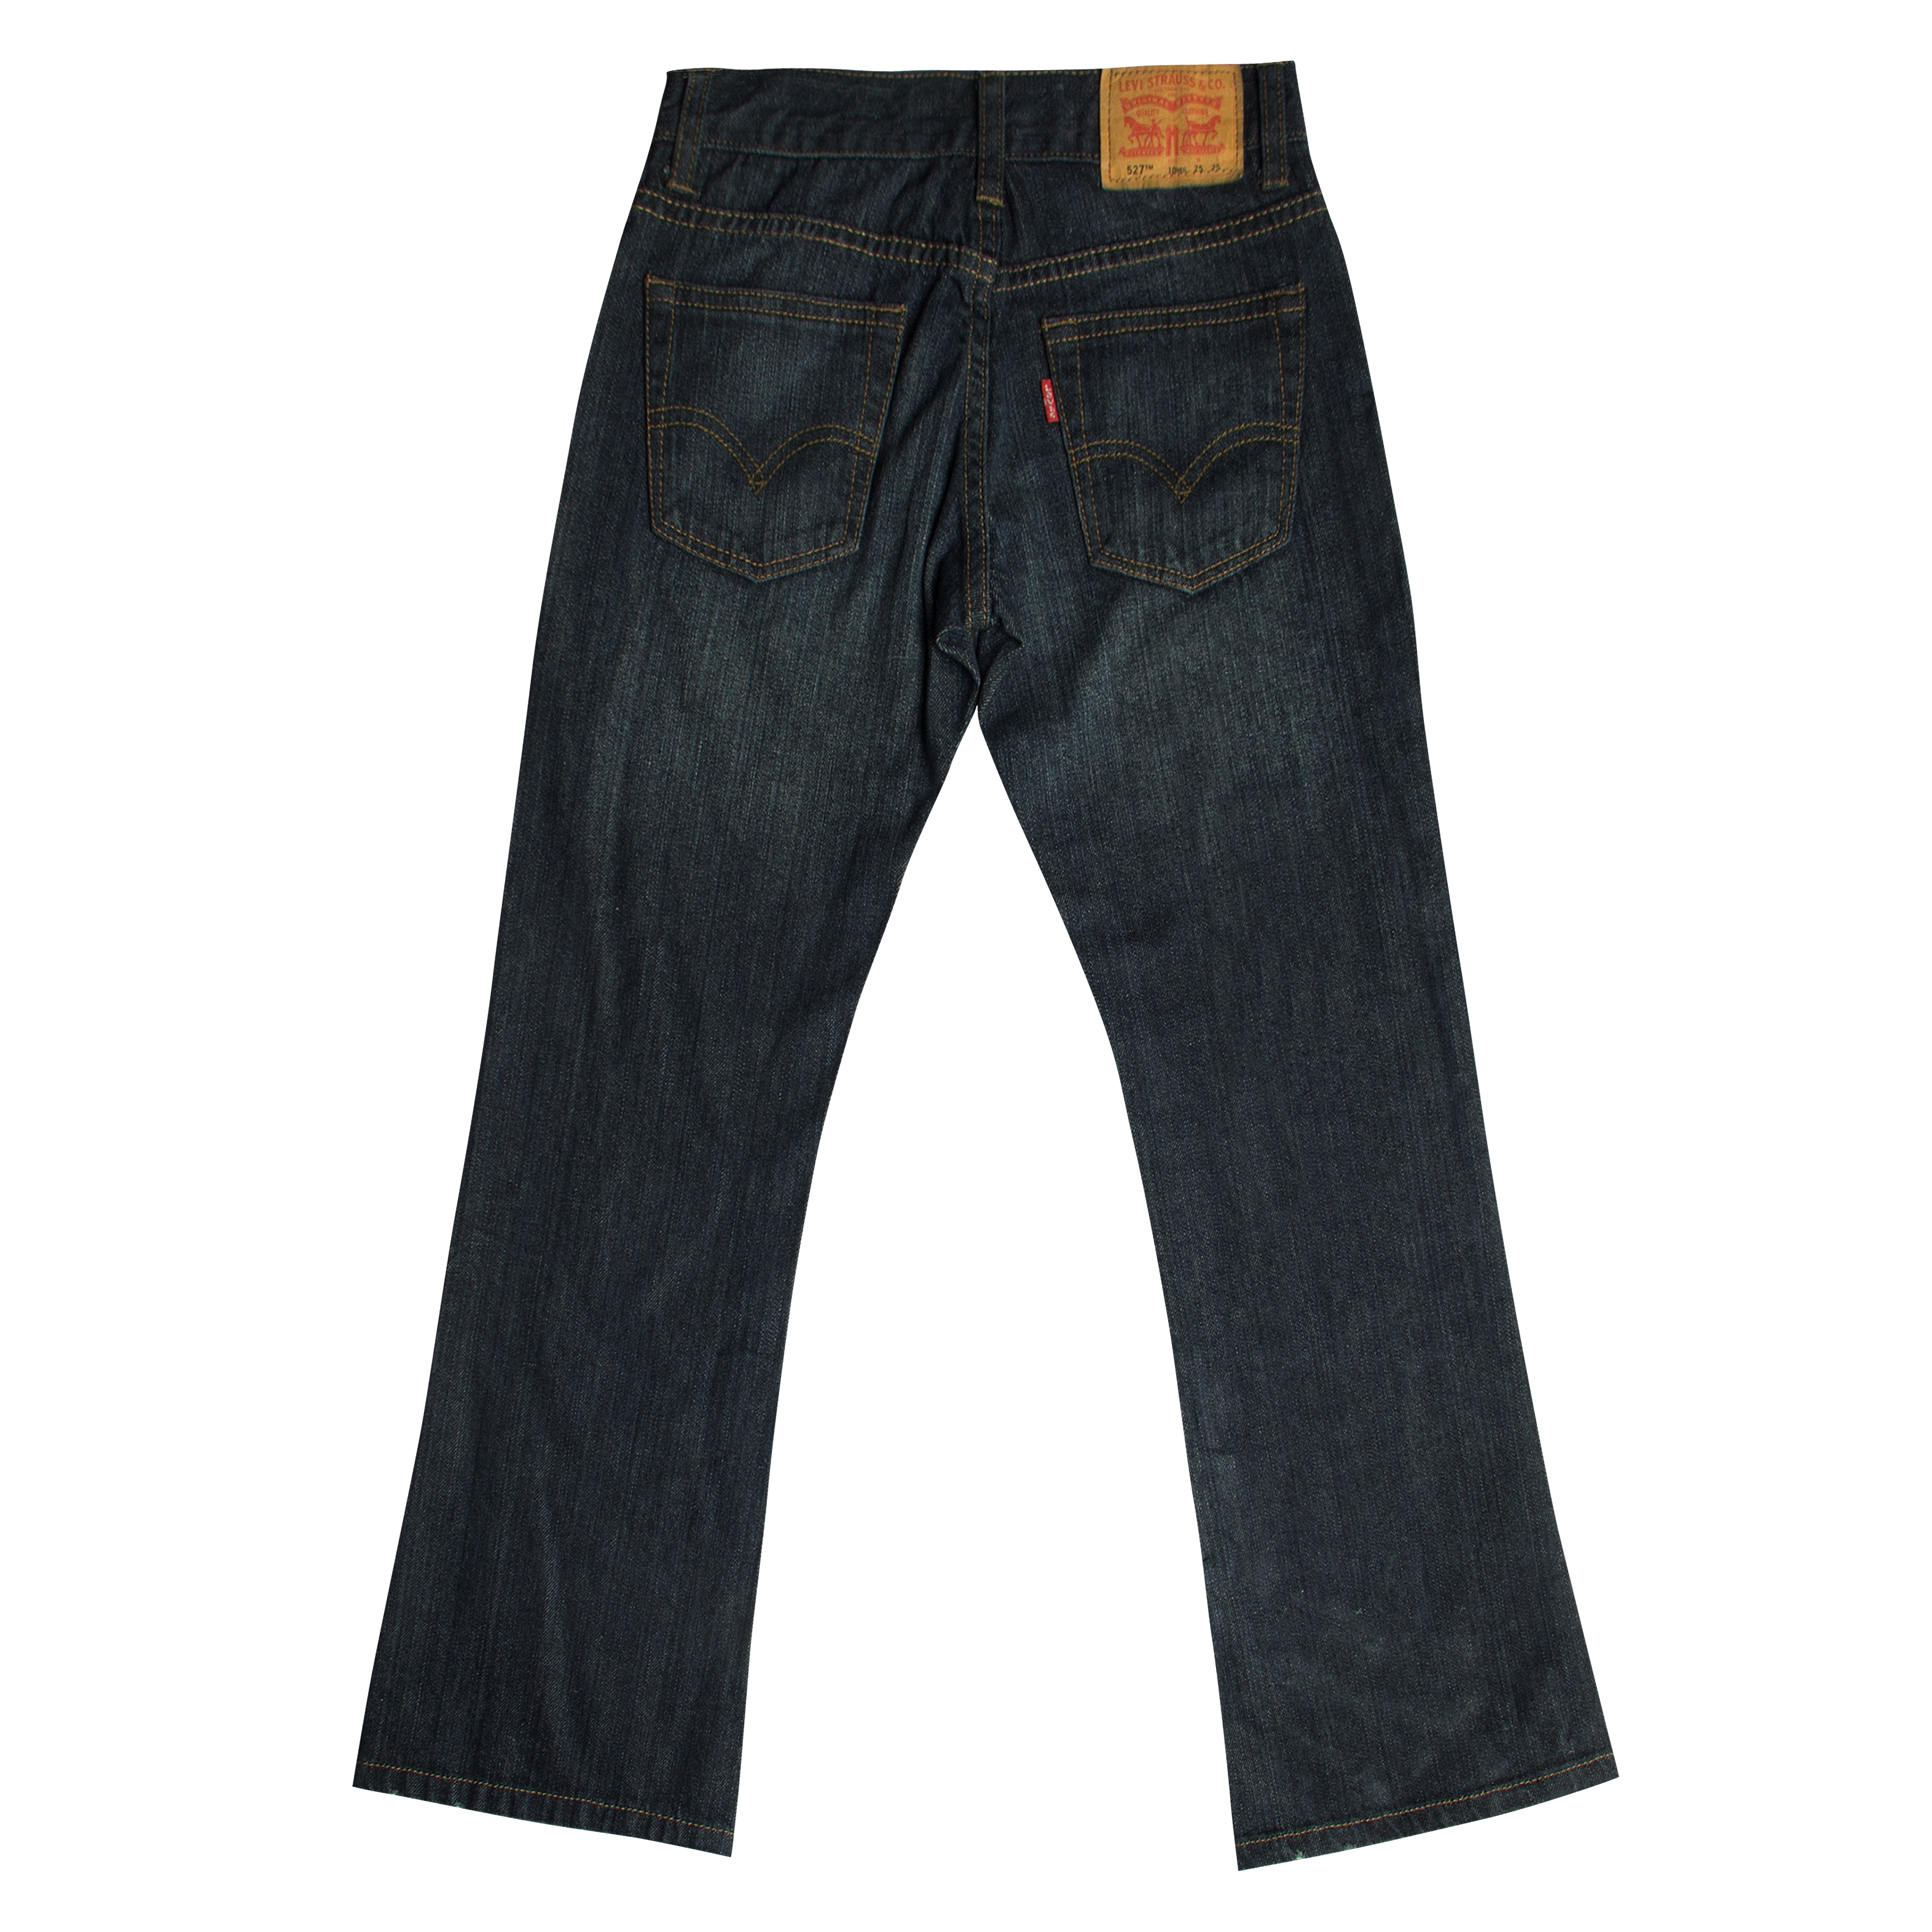 Levi's Boys' Boot Cut Jeans - image 5 of 5